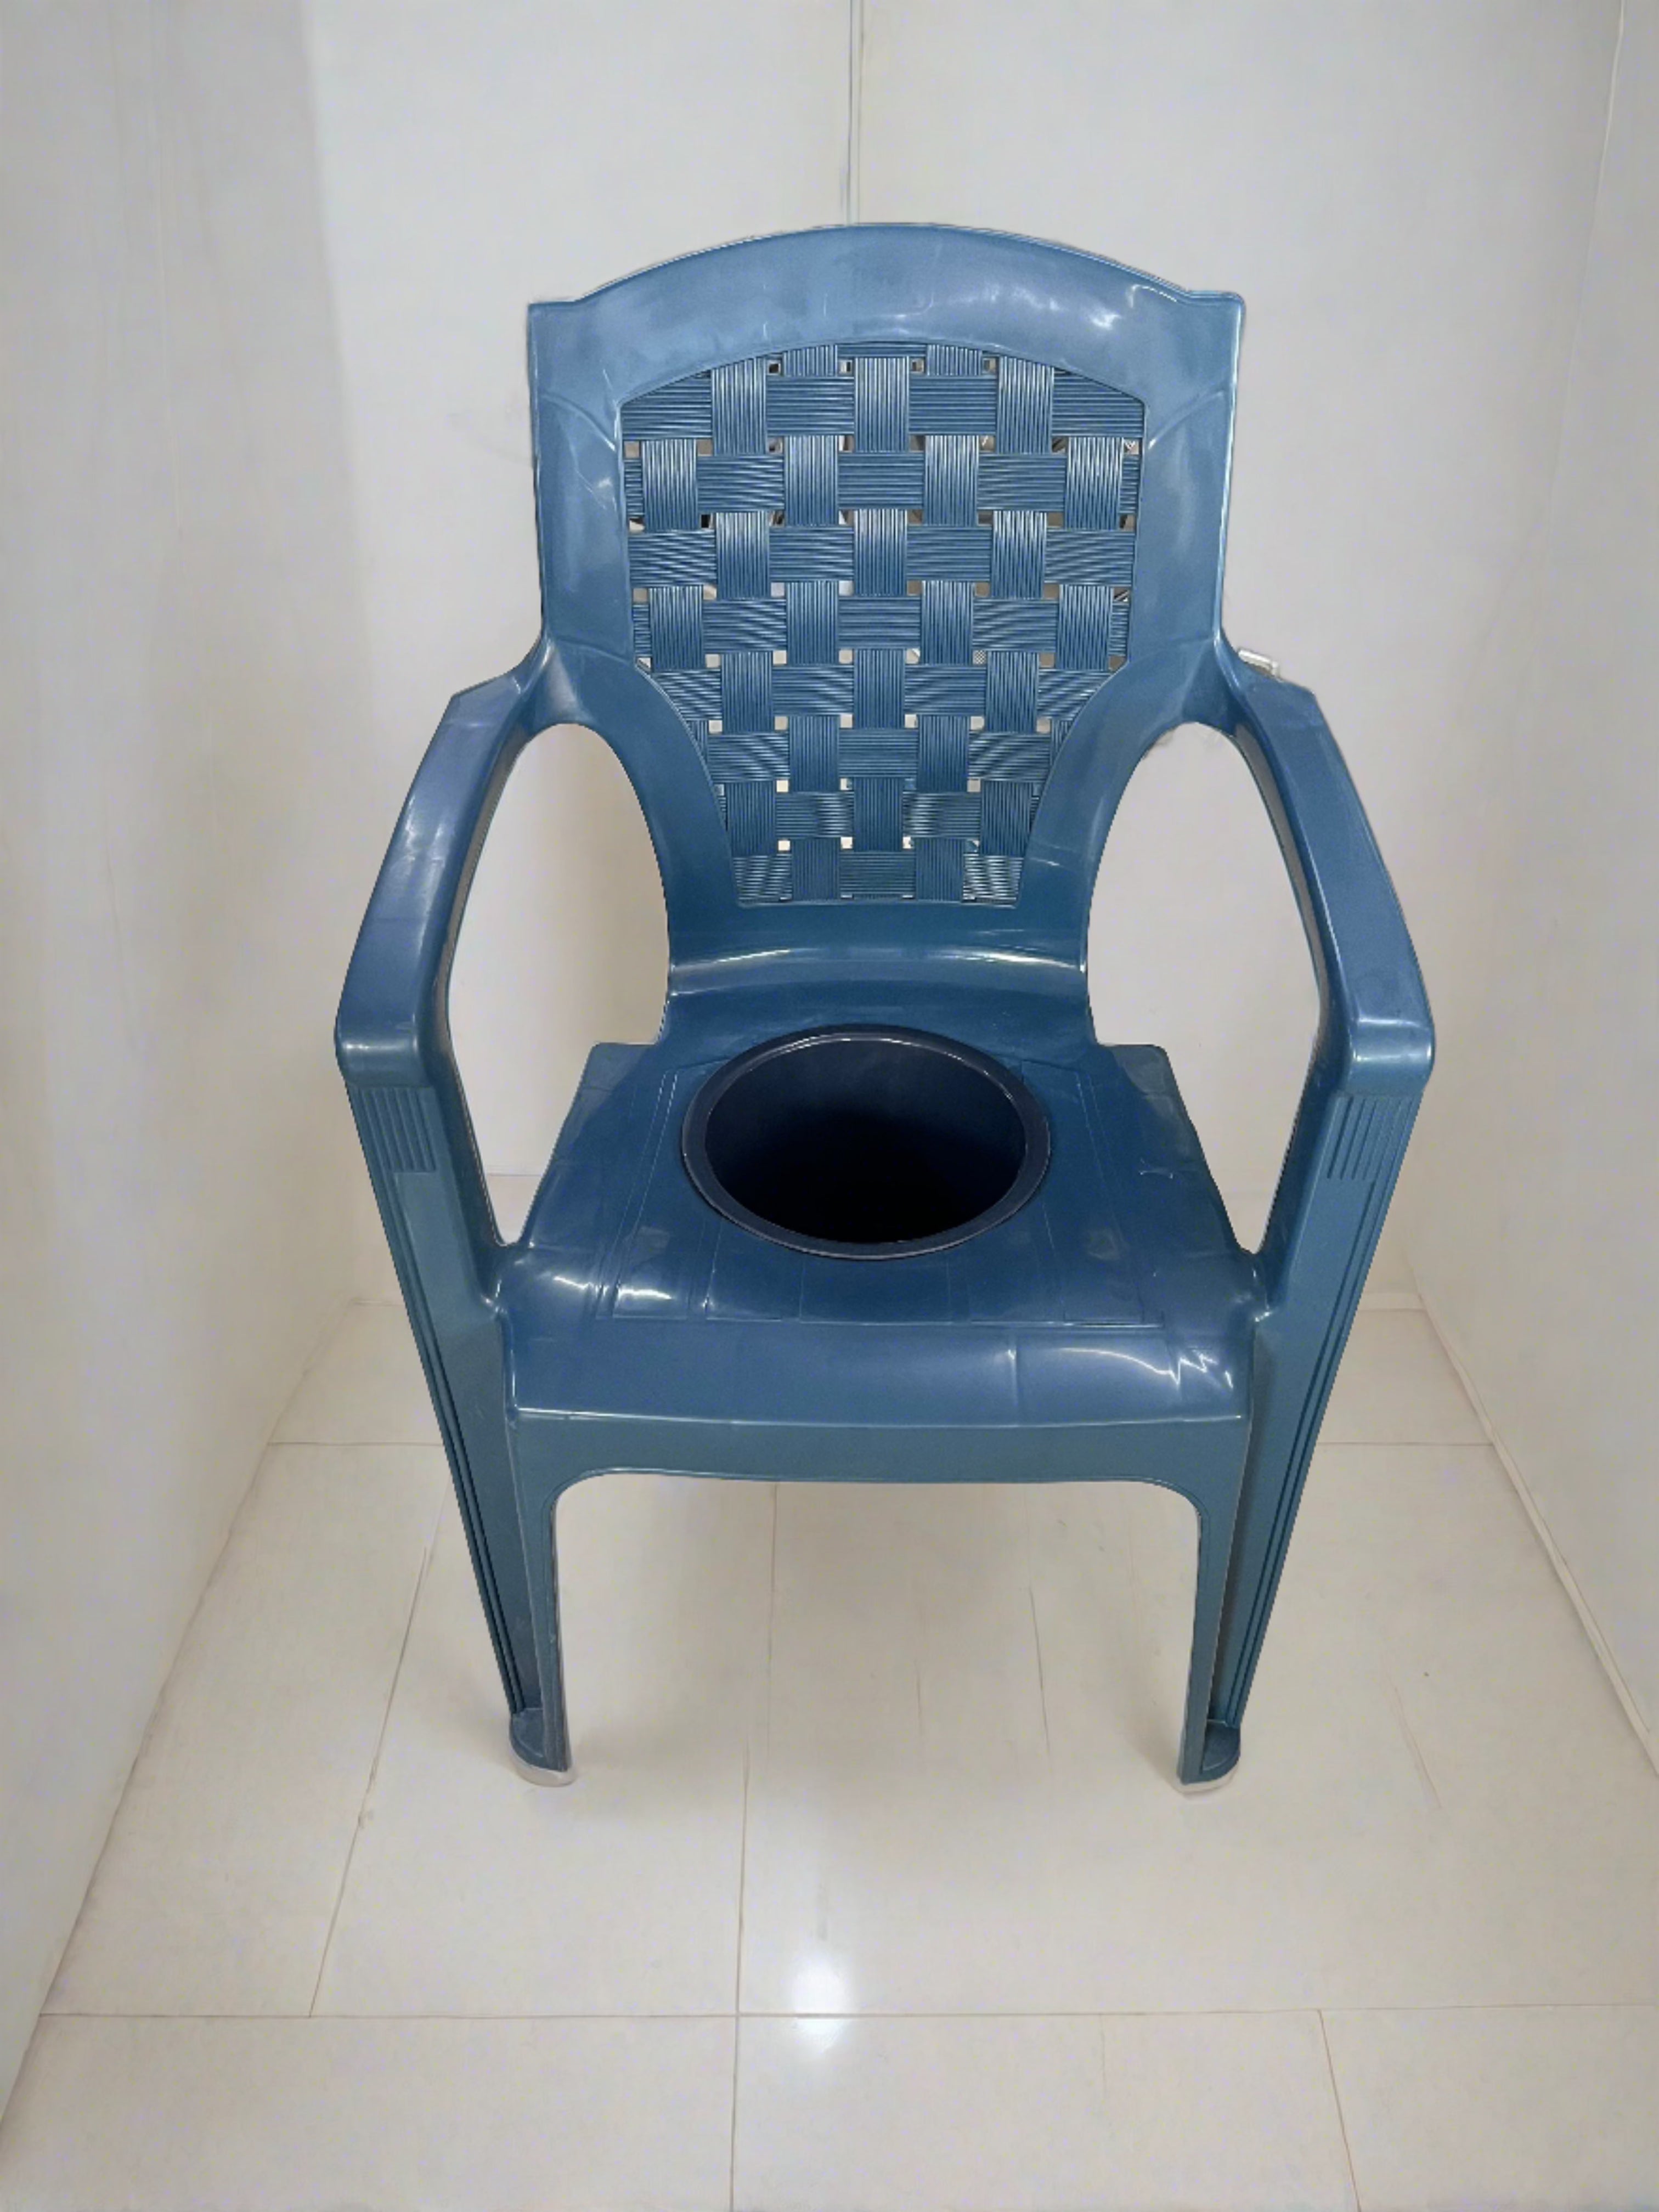 plastic pvc potty chair for lowest price in Porur